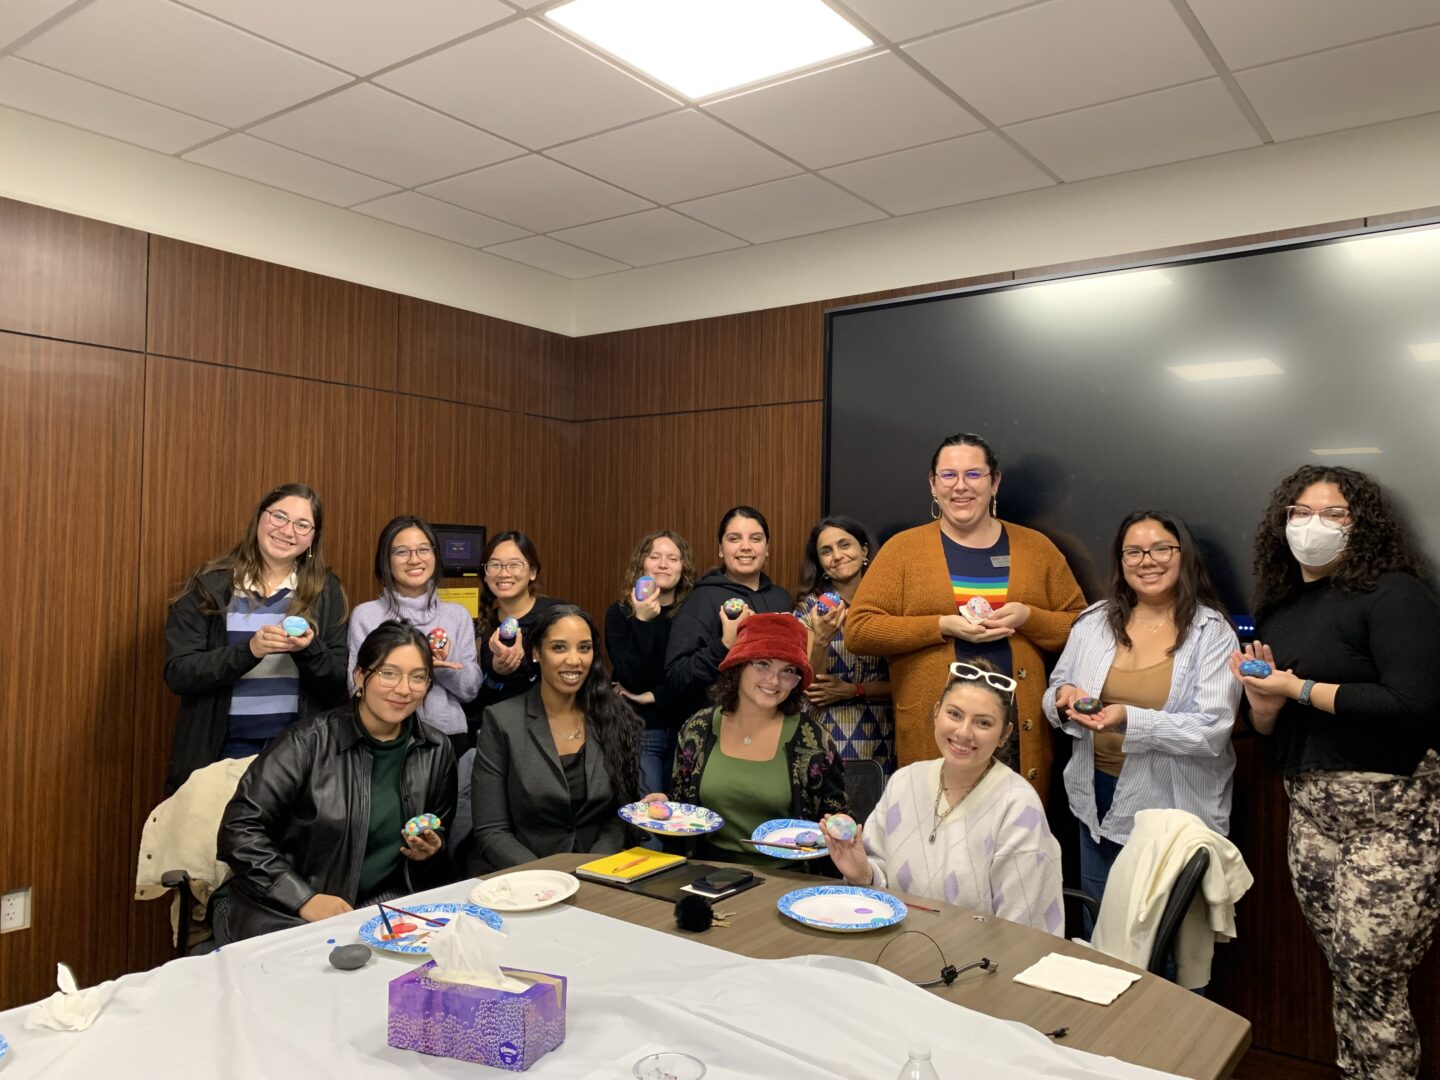 Daniela Narvaez, seated in the middle with red hat, is hosting a support group for women in STEM majors in hopes of increasing graduation and retention rates.